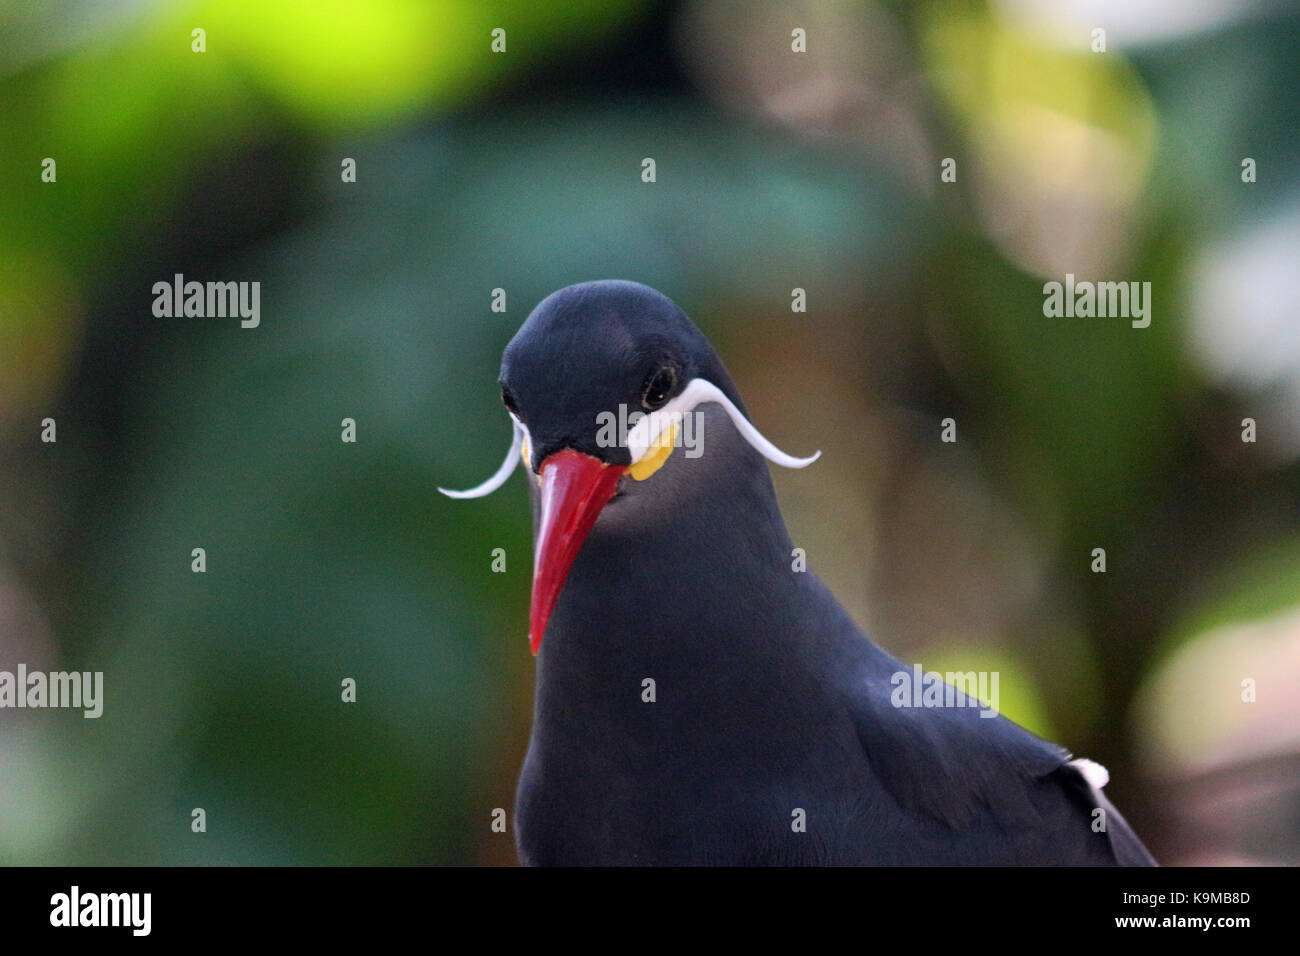 A close up head shot of an Inca Tern Bird native to Peru and Chile with a natural colorful background. Stock Photo